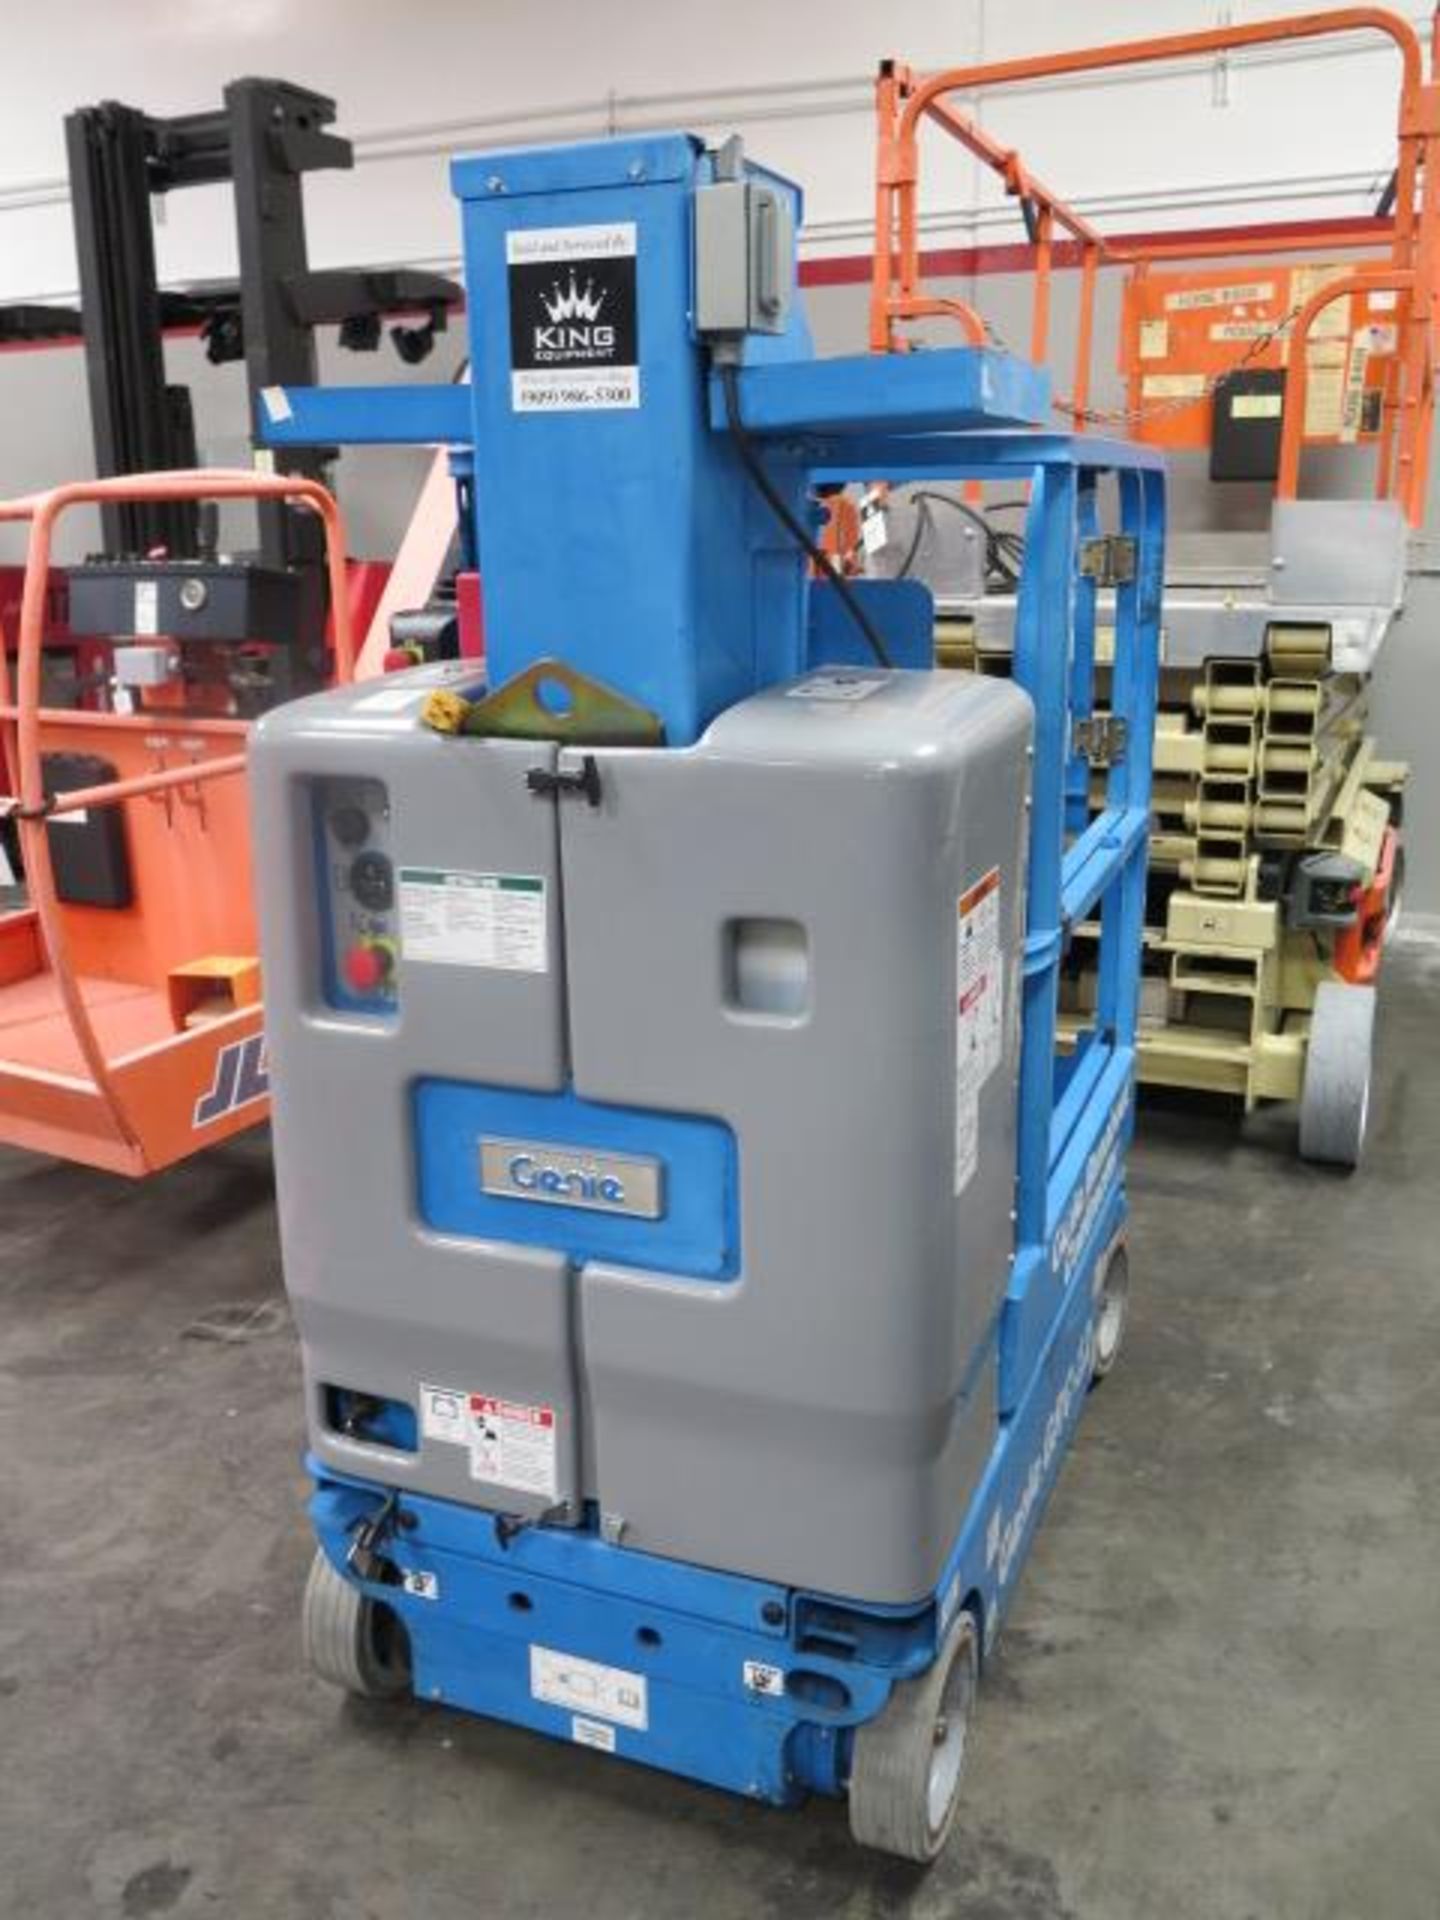 2010 Genie GRC-12 "Runabout Contractor" Electric Platform Lift s/n GRC10-315 w/ 12' Lift, SOLD AS IS - Image 7 of 14